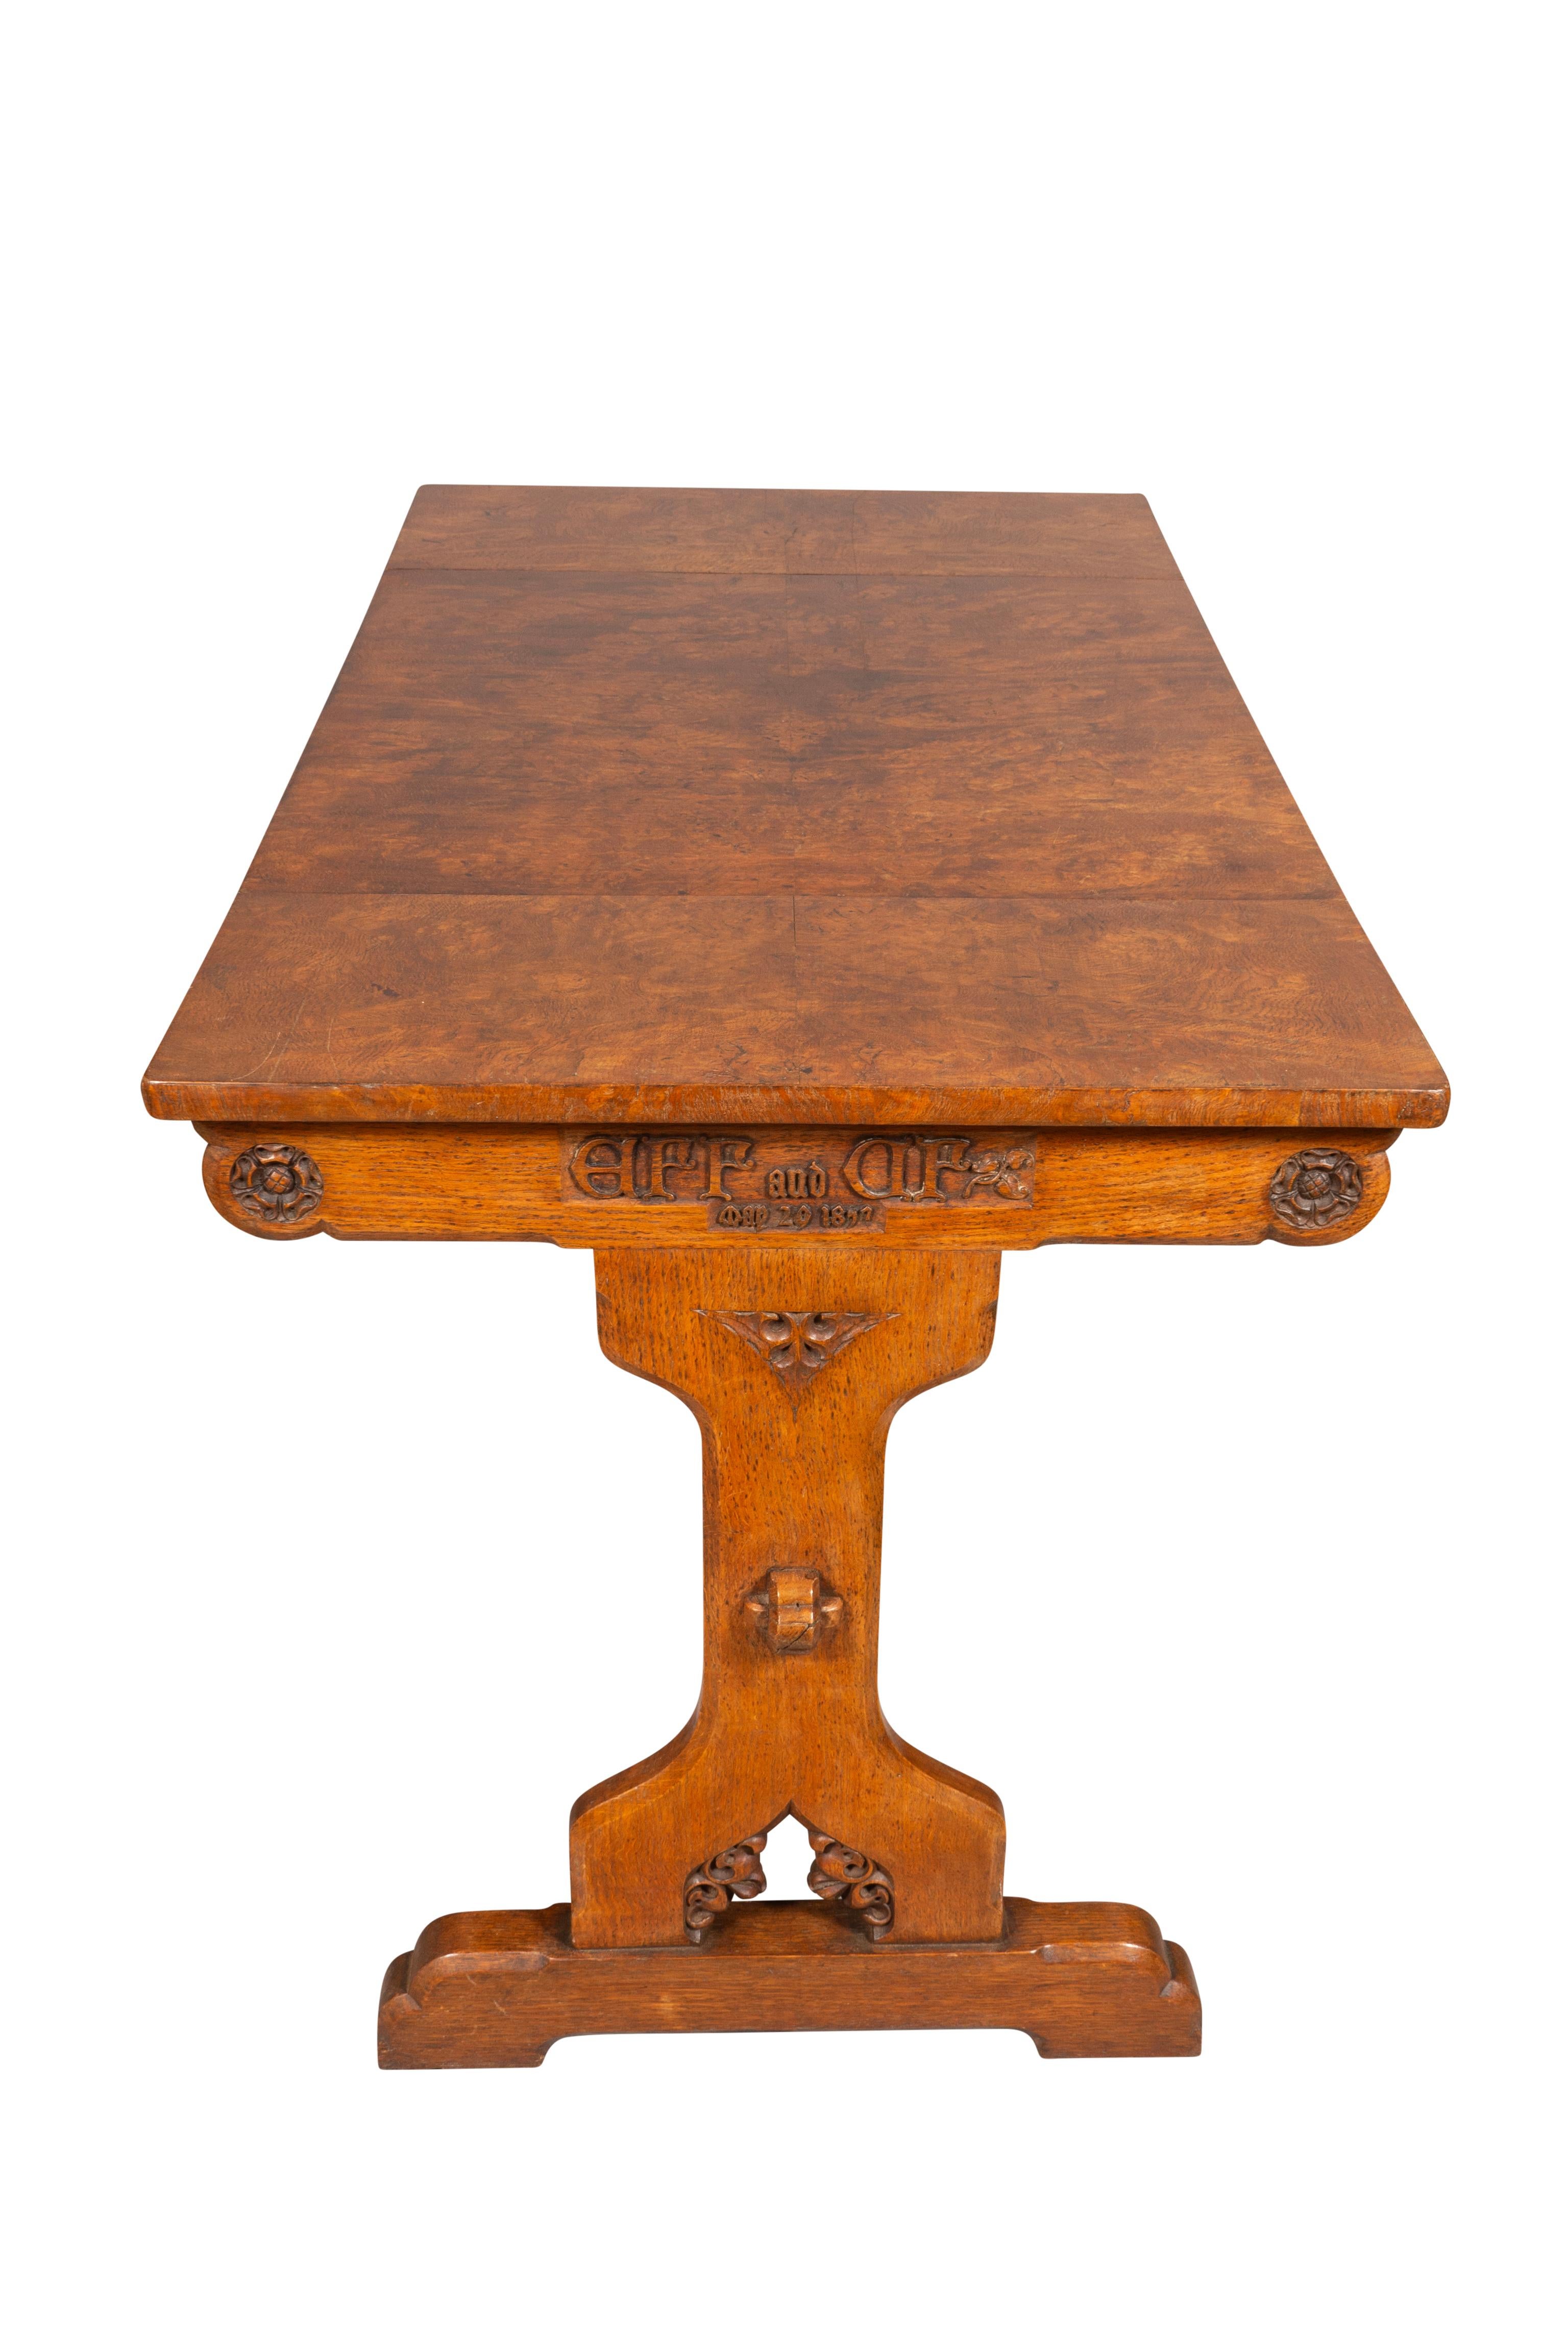 Victorian Gothic Revival Pollard Oak Games Table Attributed To Pugin In Good Condition For Sale In Essex, MA